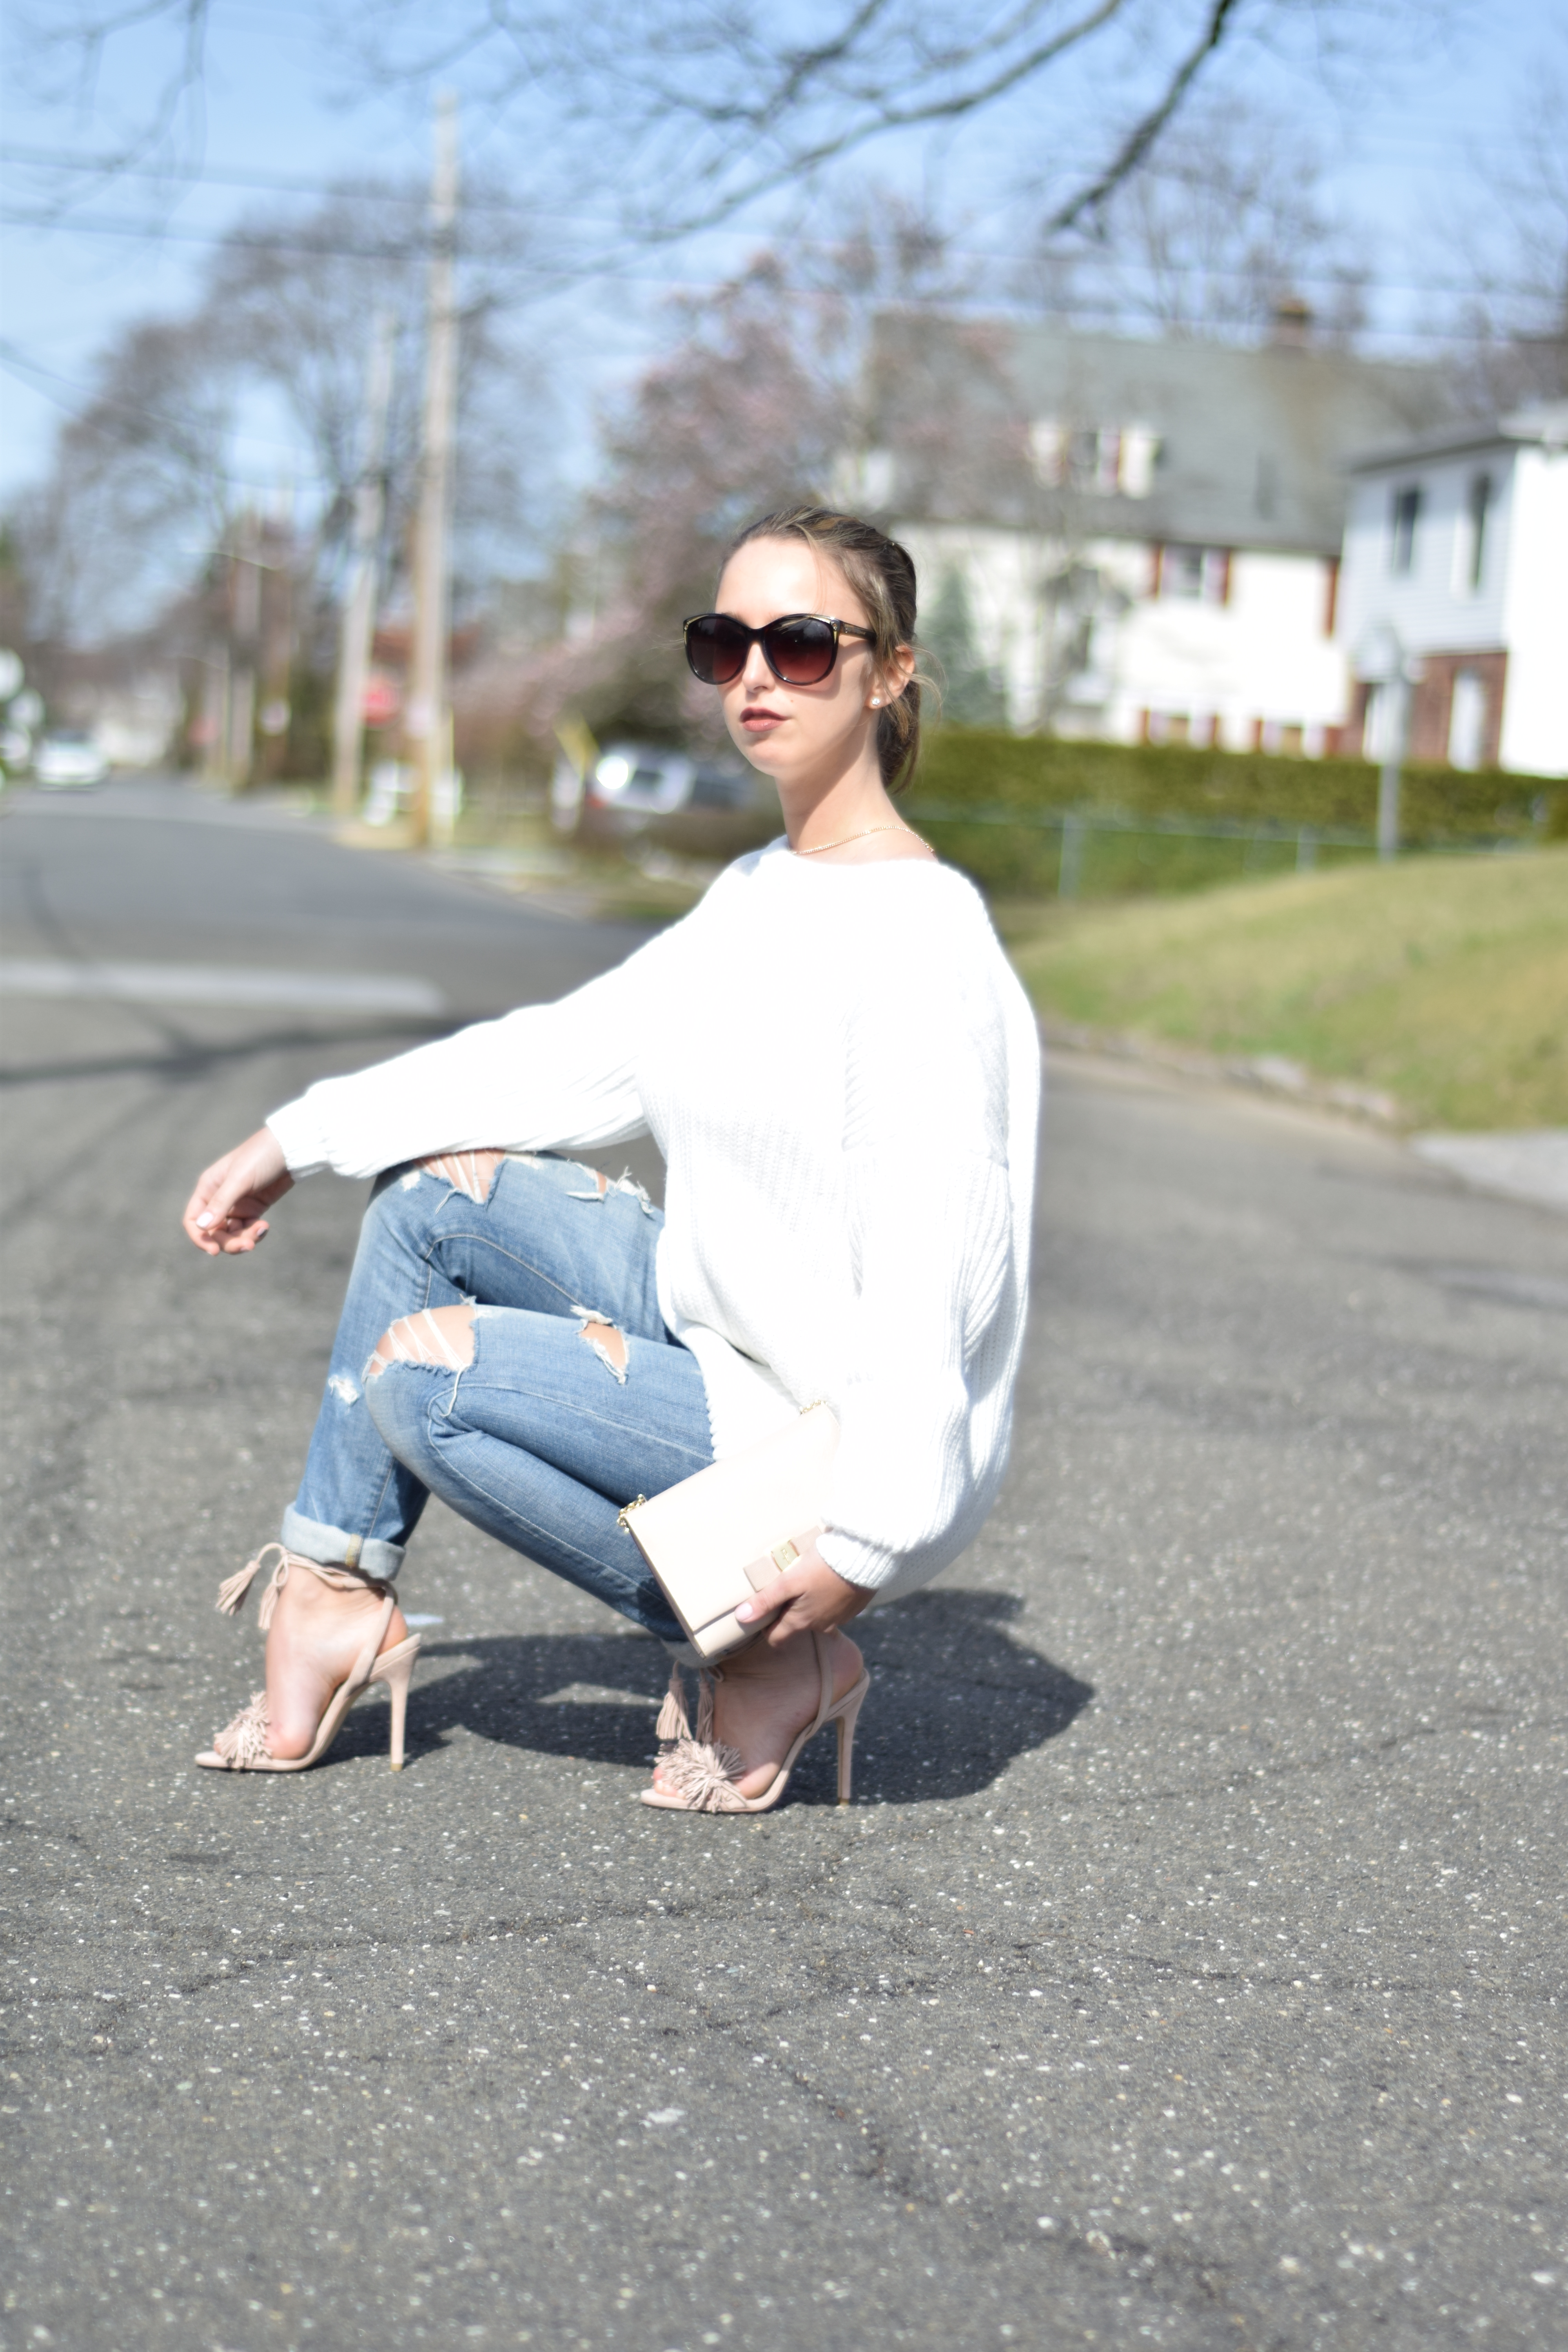 Business in the Front - You Know The Rest! White Sweater - Outfit - Style - Spring - Ripped Jeans #bloggerstyle #fashion #Oufit #westchester #simplybysimone #sweater